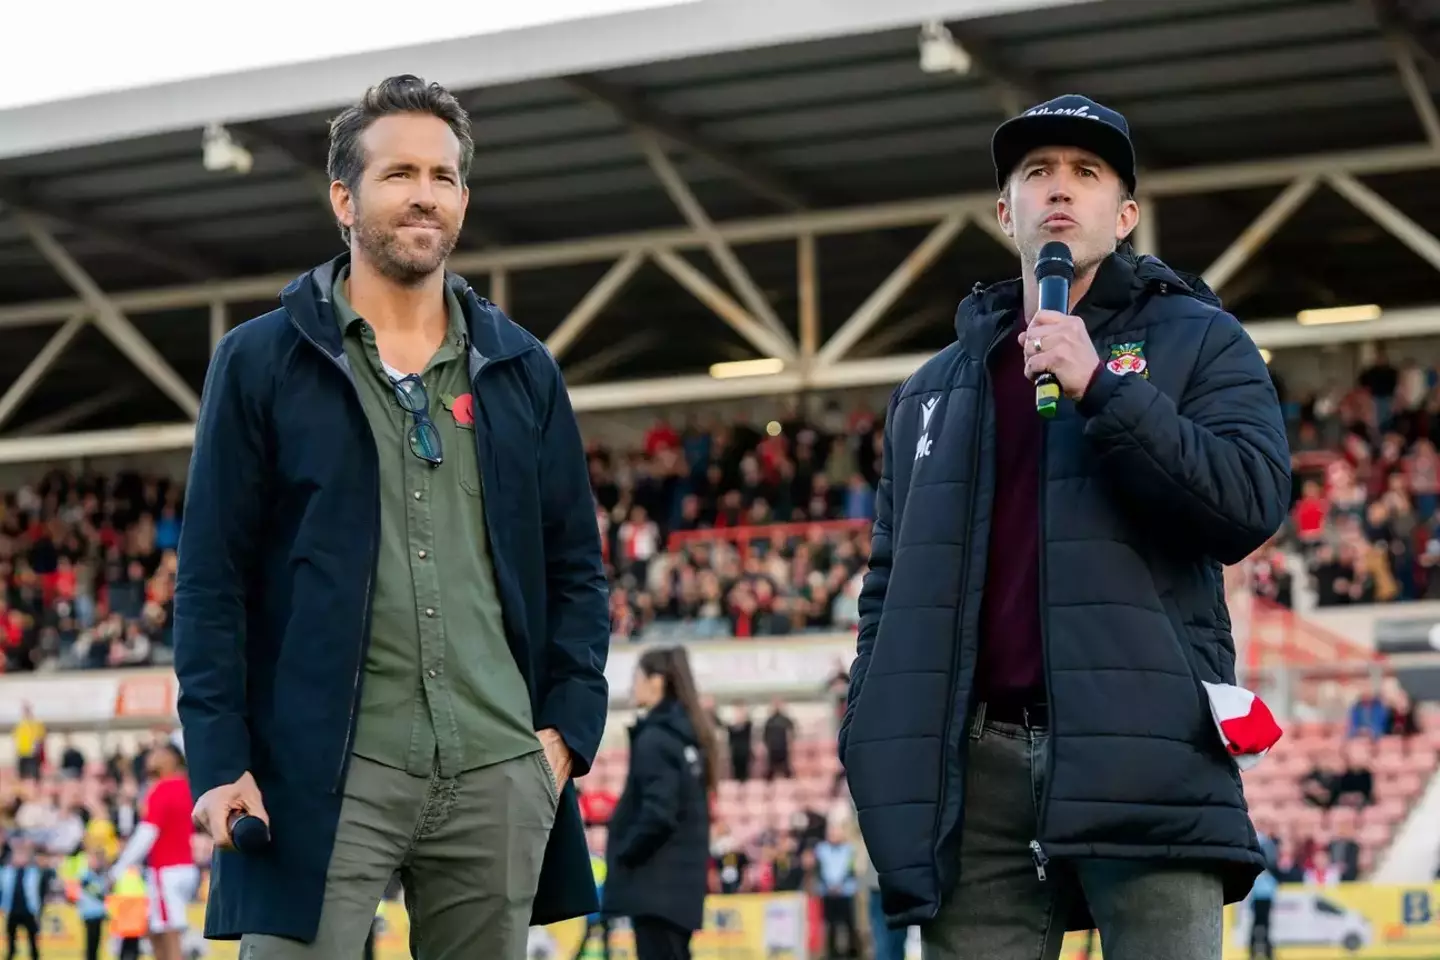 Rob McElhenney has responded to Paul Rudd's video showing his reaction to Wrexham's title win.